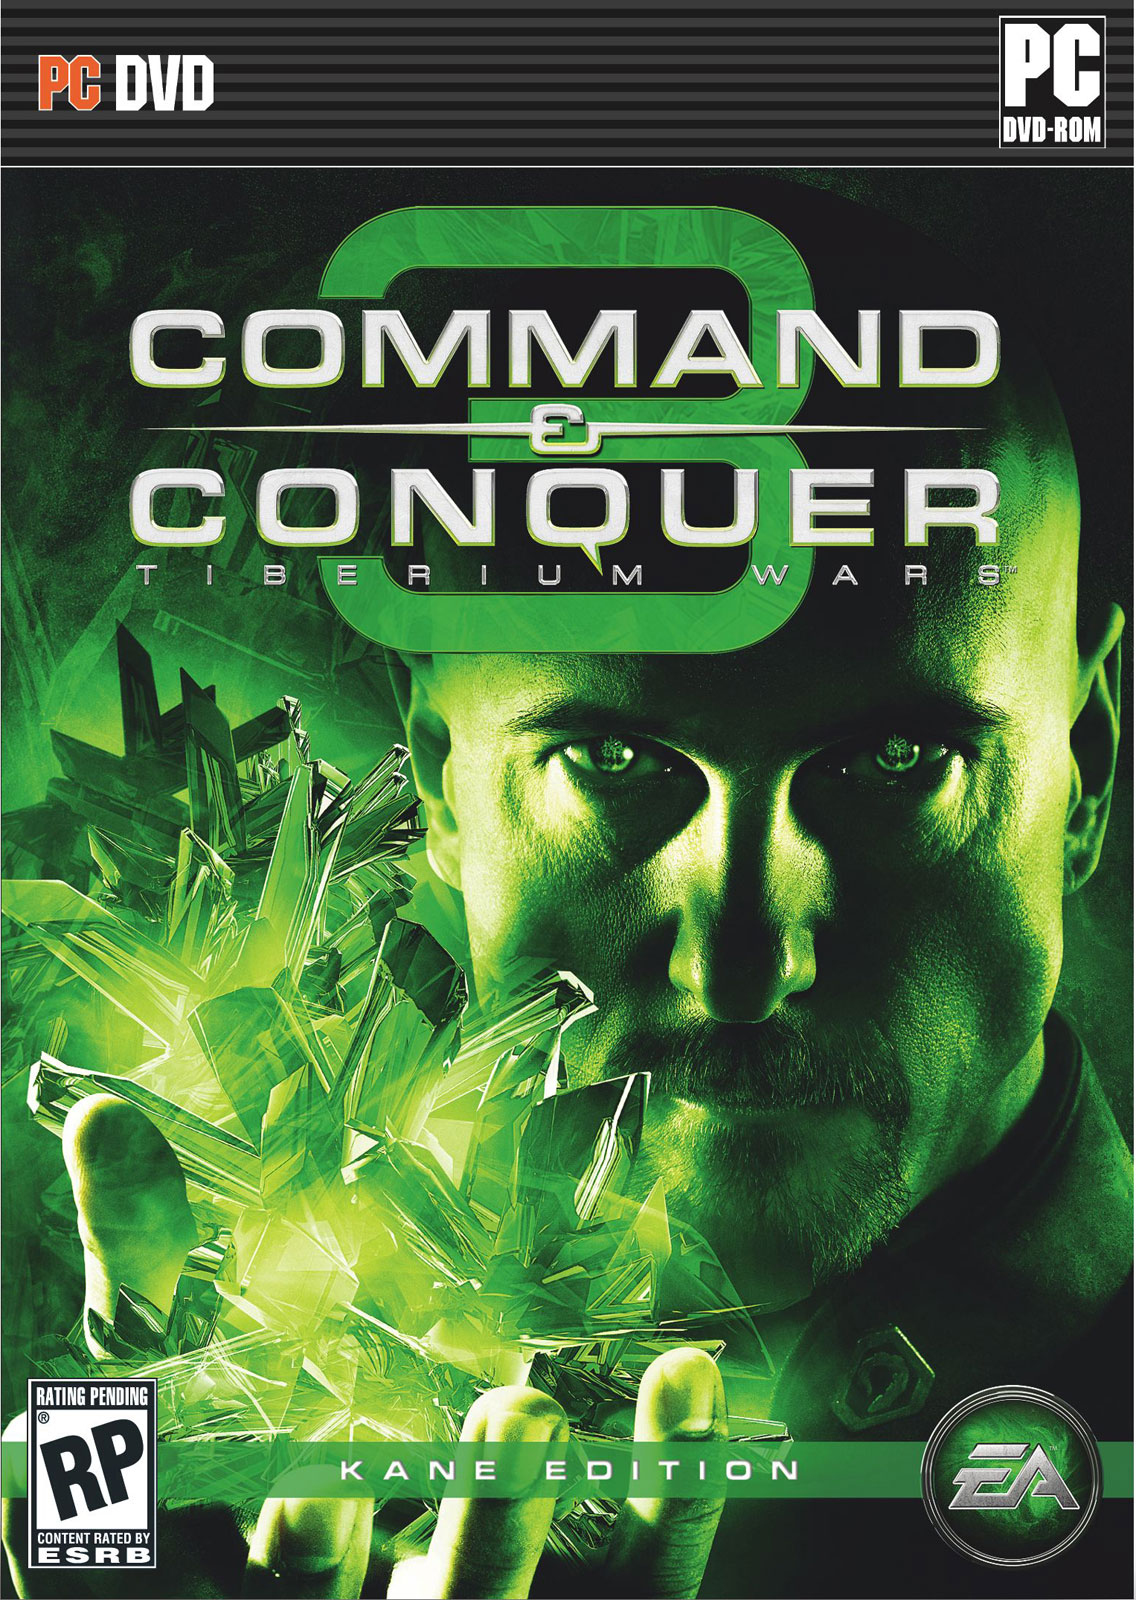 Command and conquer 3 tiberium wars kane edition cd keygen